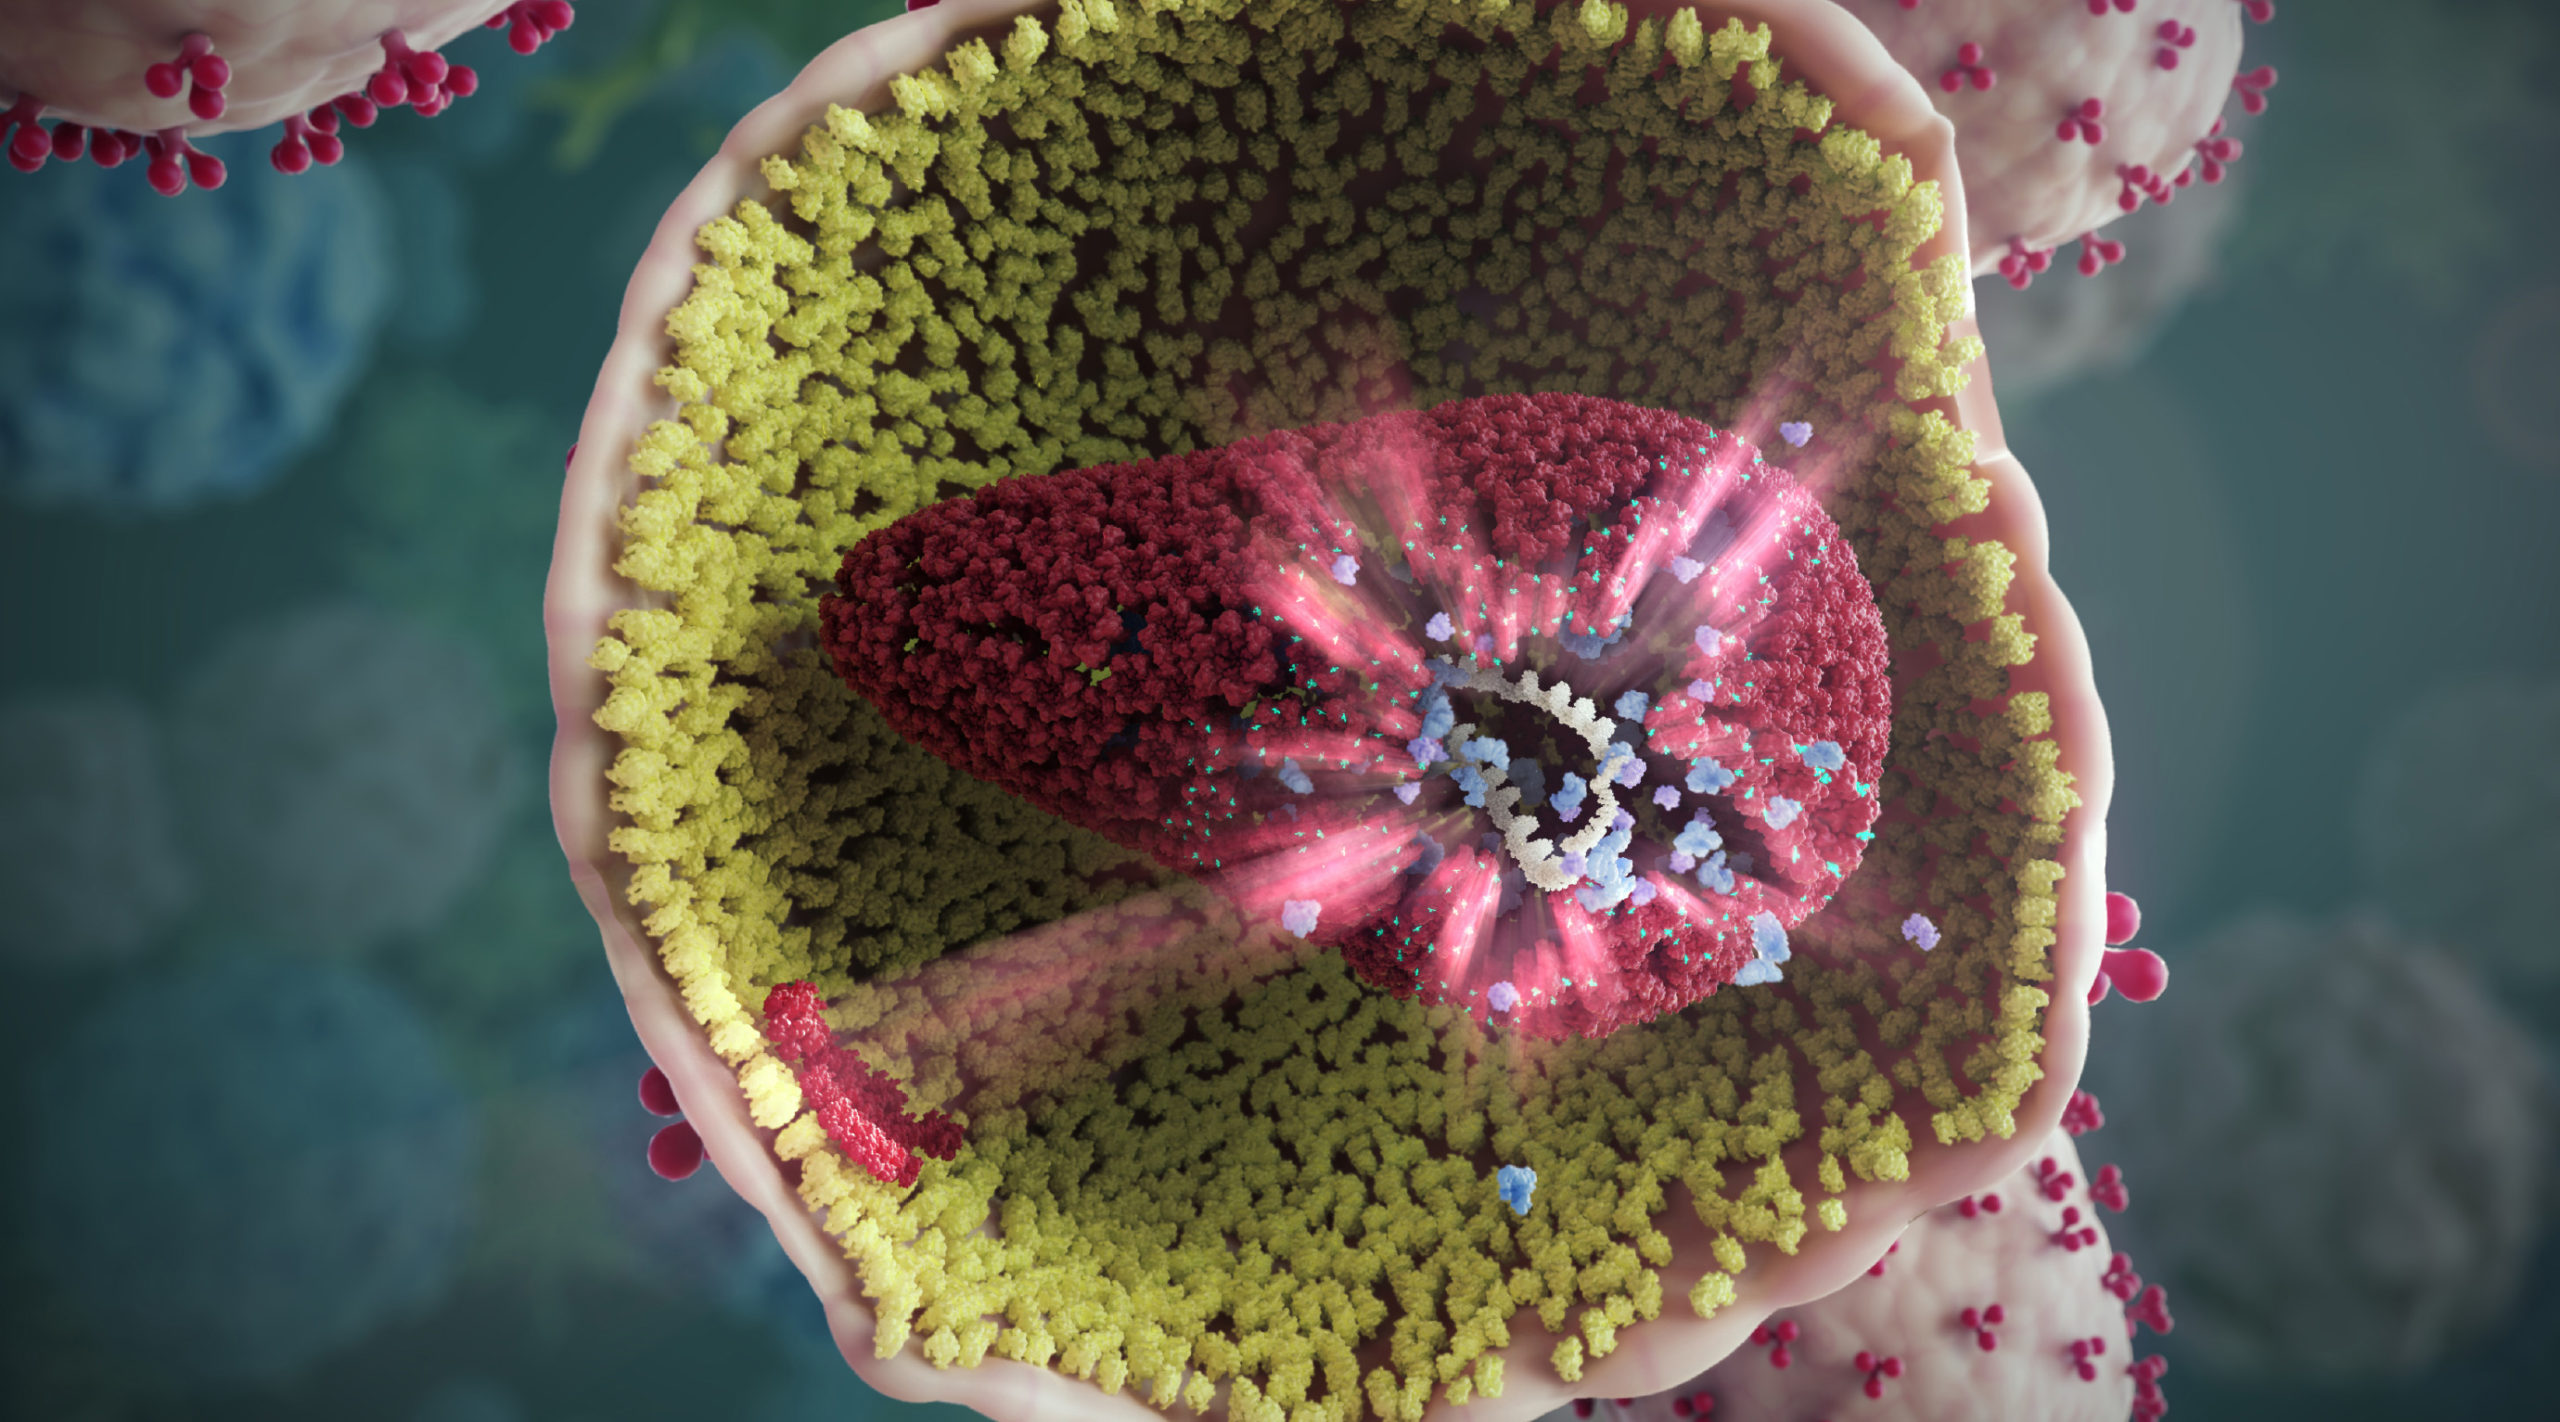 Artwork showing cutaway view of an HIV particle with disrupted capsid inside.